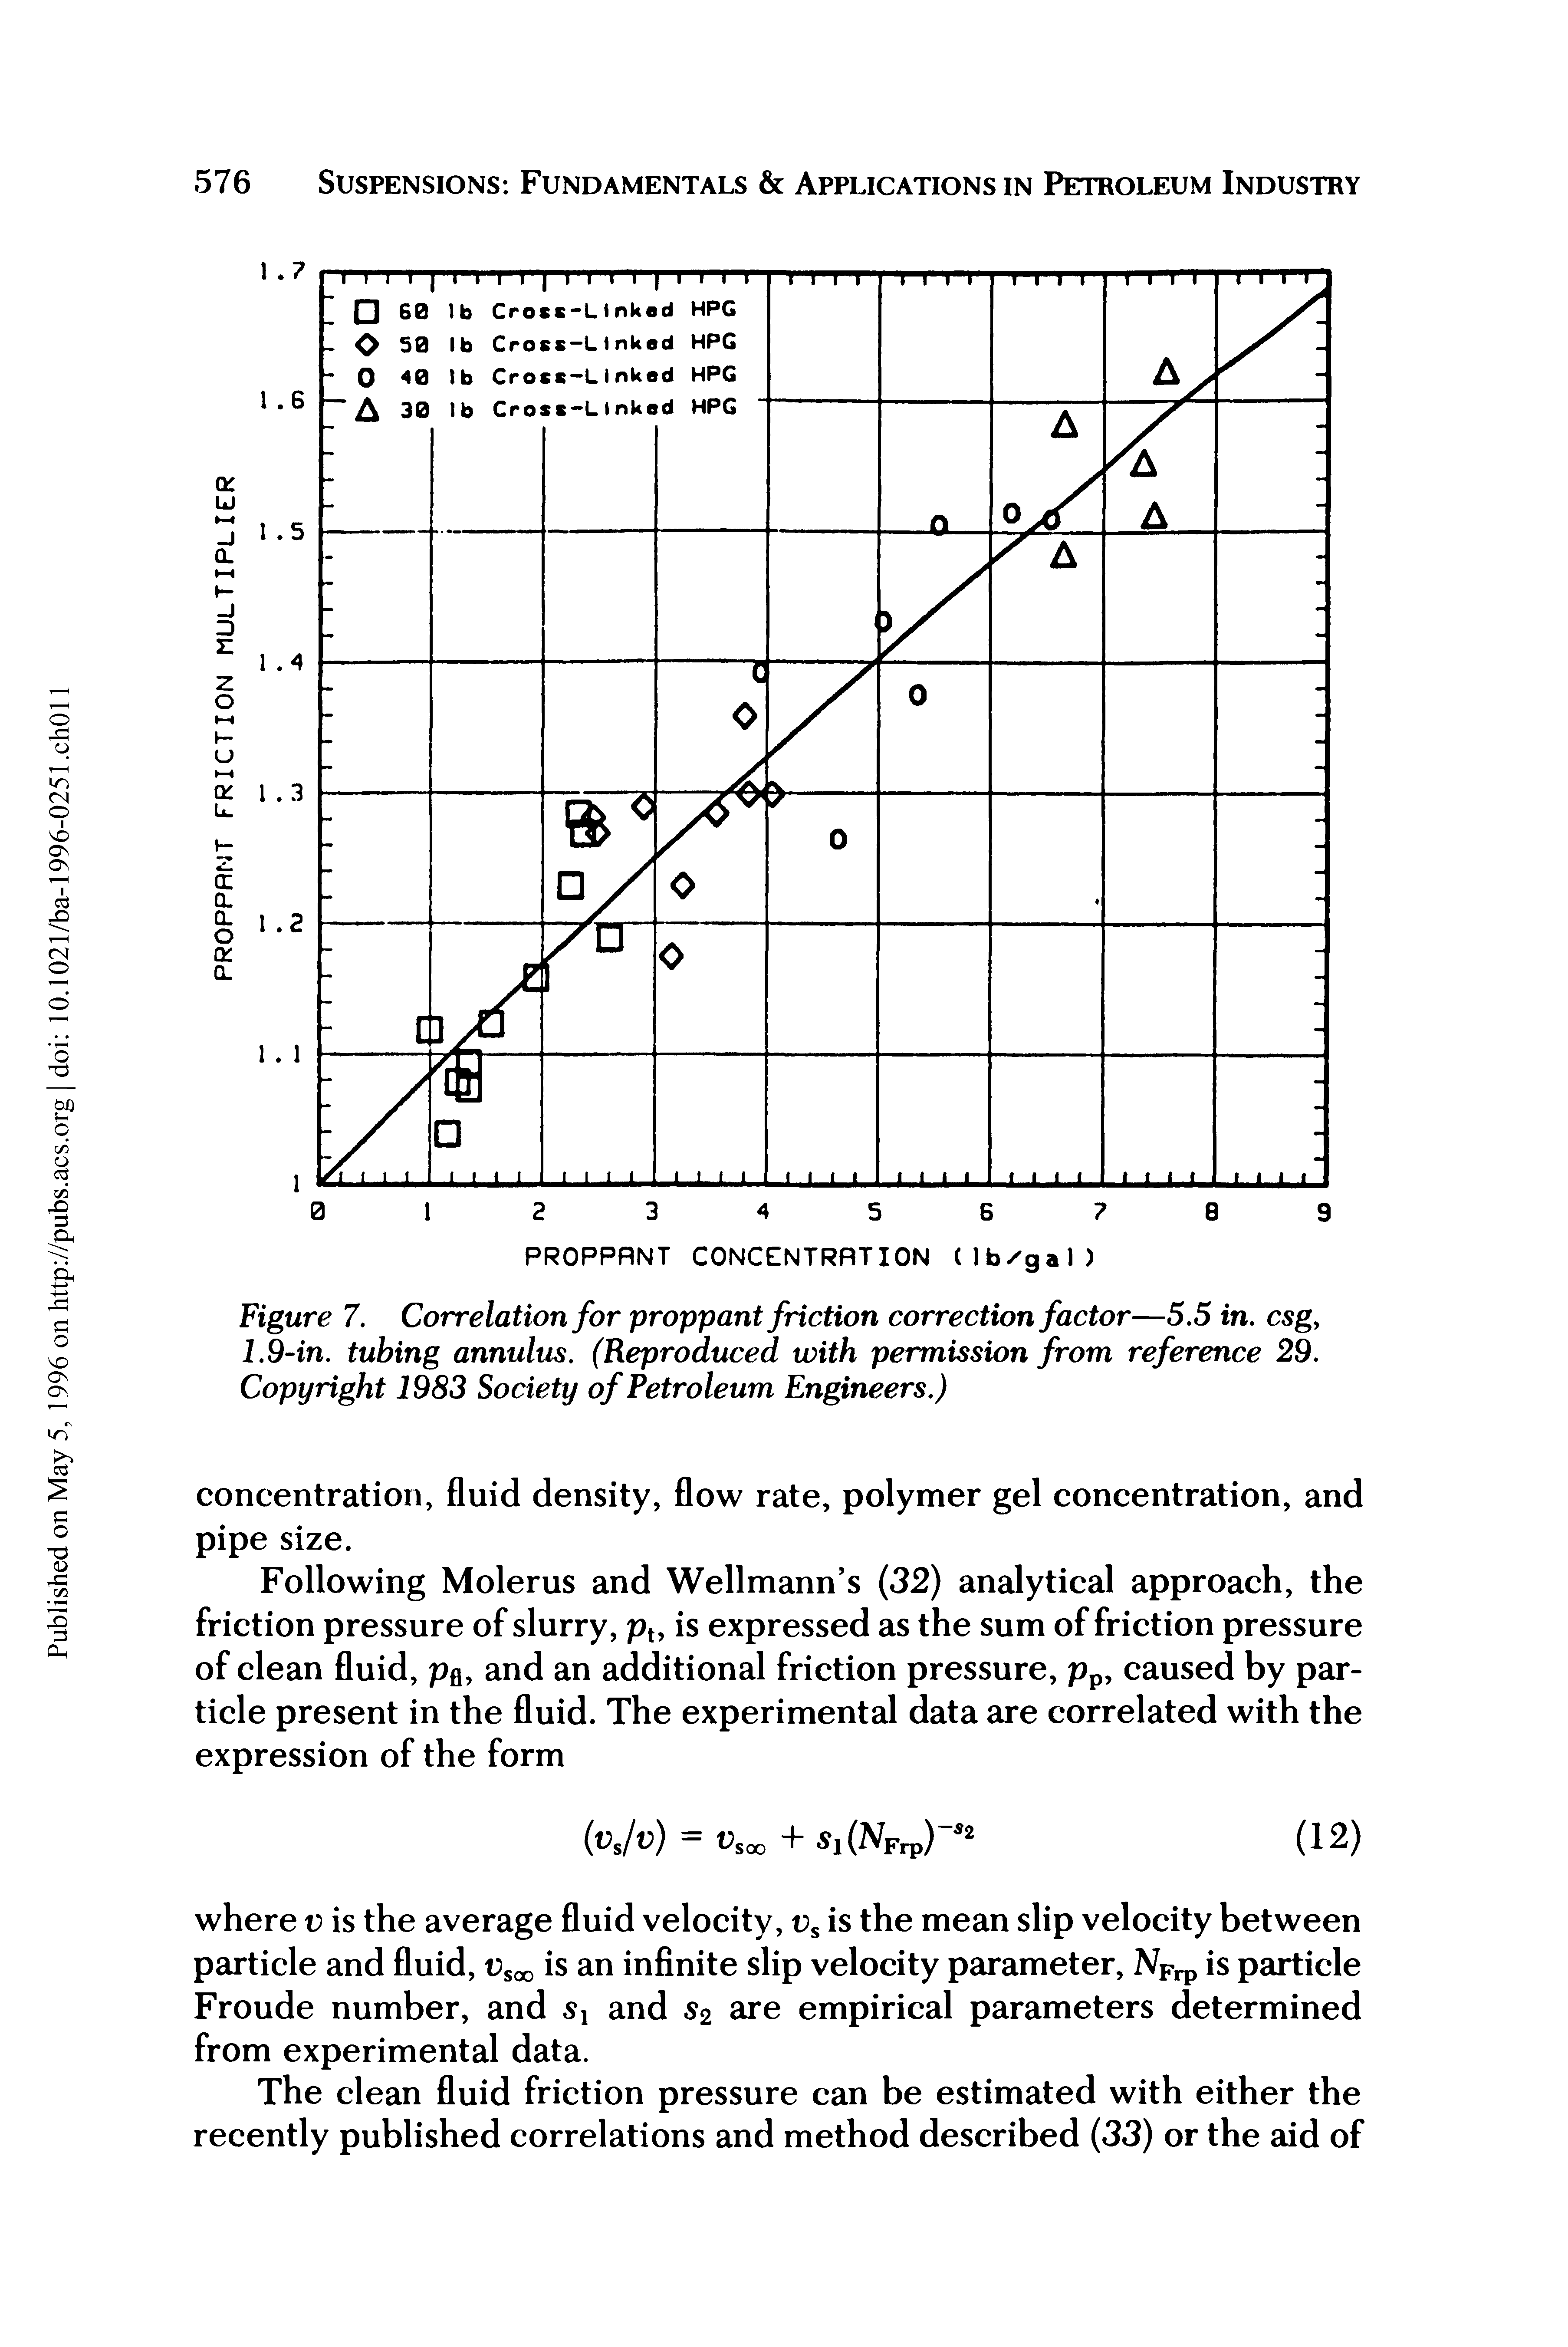 Figure 7. Correlation for proppant friction correction factor—5.5 in. csg, 1.9-in. tubing annulus. (Reproduced with permission from reference 29. Copyright 1983 Society of Petroleum Engineers.)...